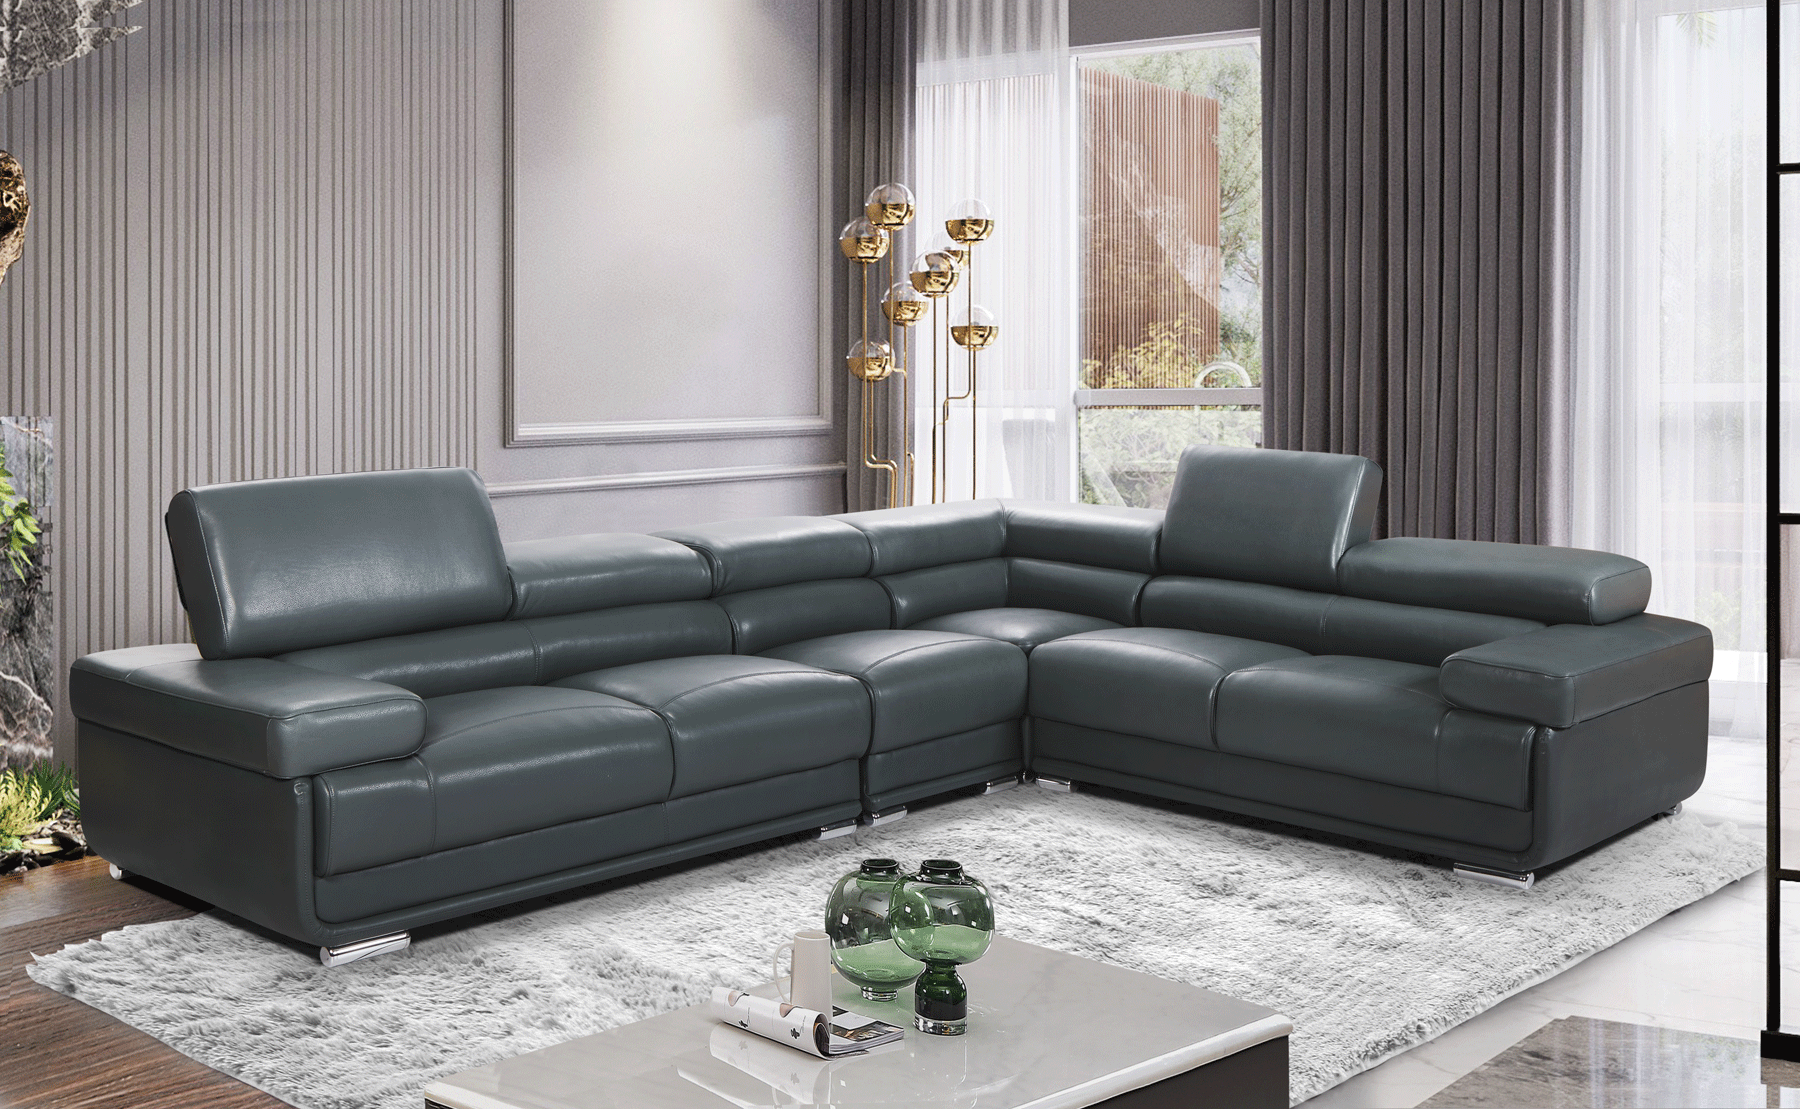 Living Room Furniture Reclining and Sliding Seats Sets 2119 Sectional Dark Grey